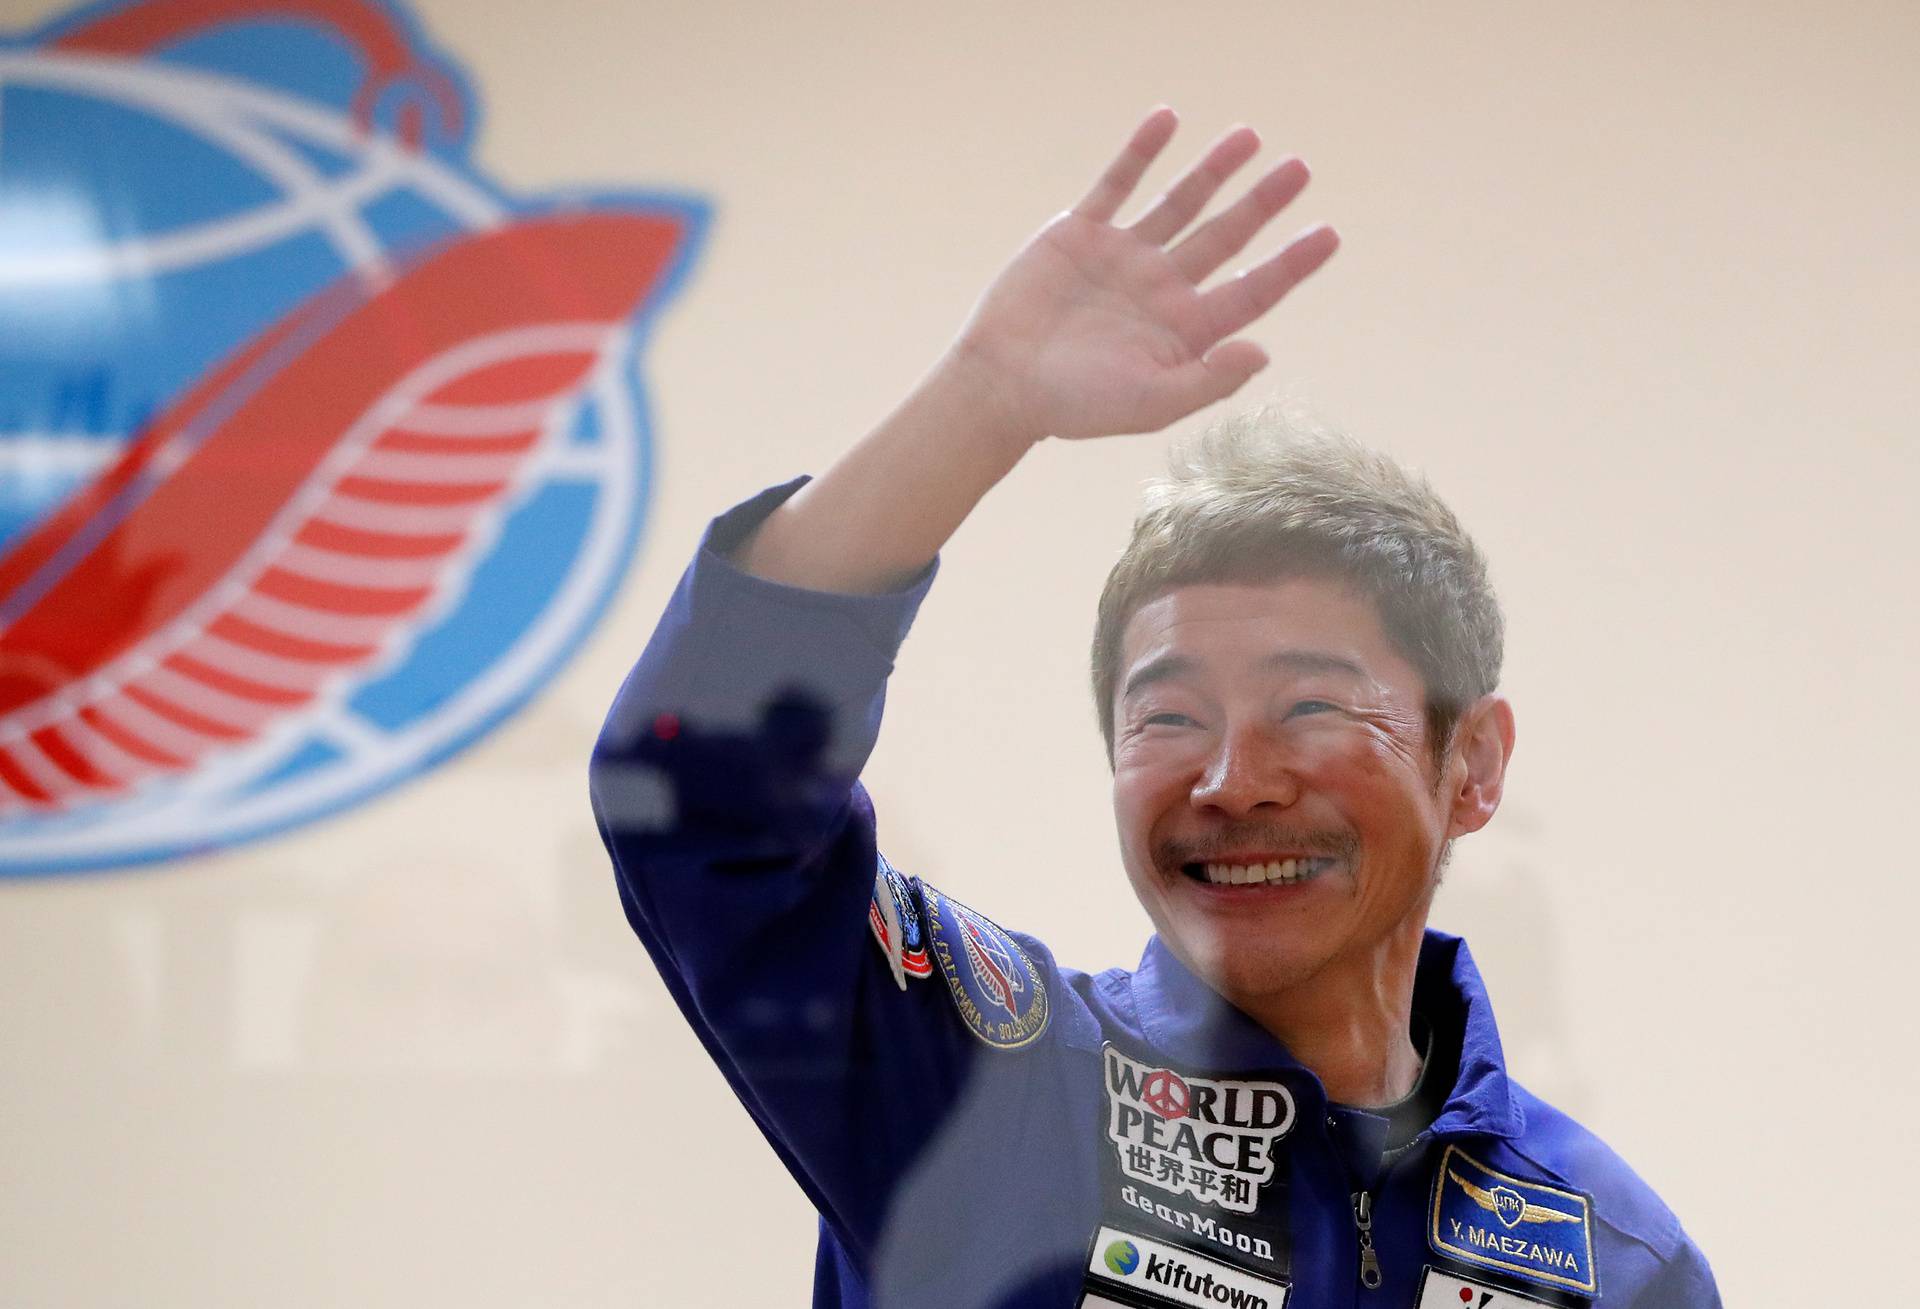 Space flight participant Yusaku Maezawa attends a news conference in Baikonur